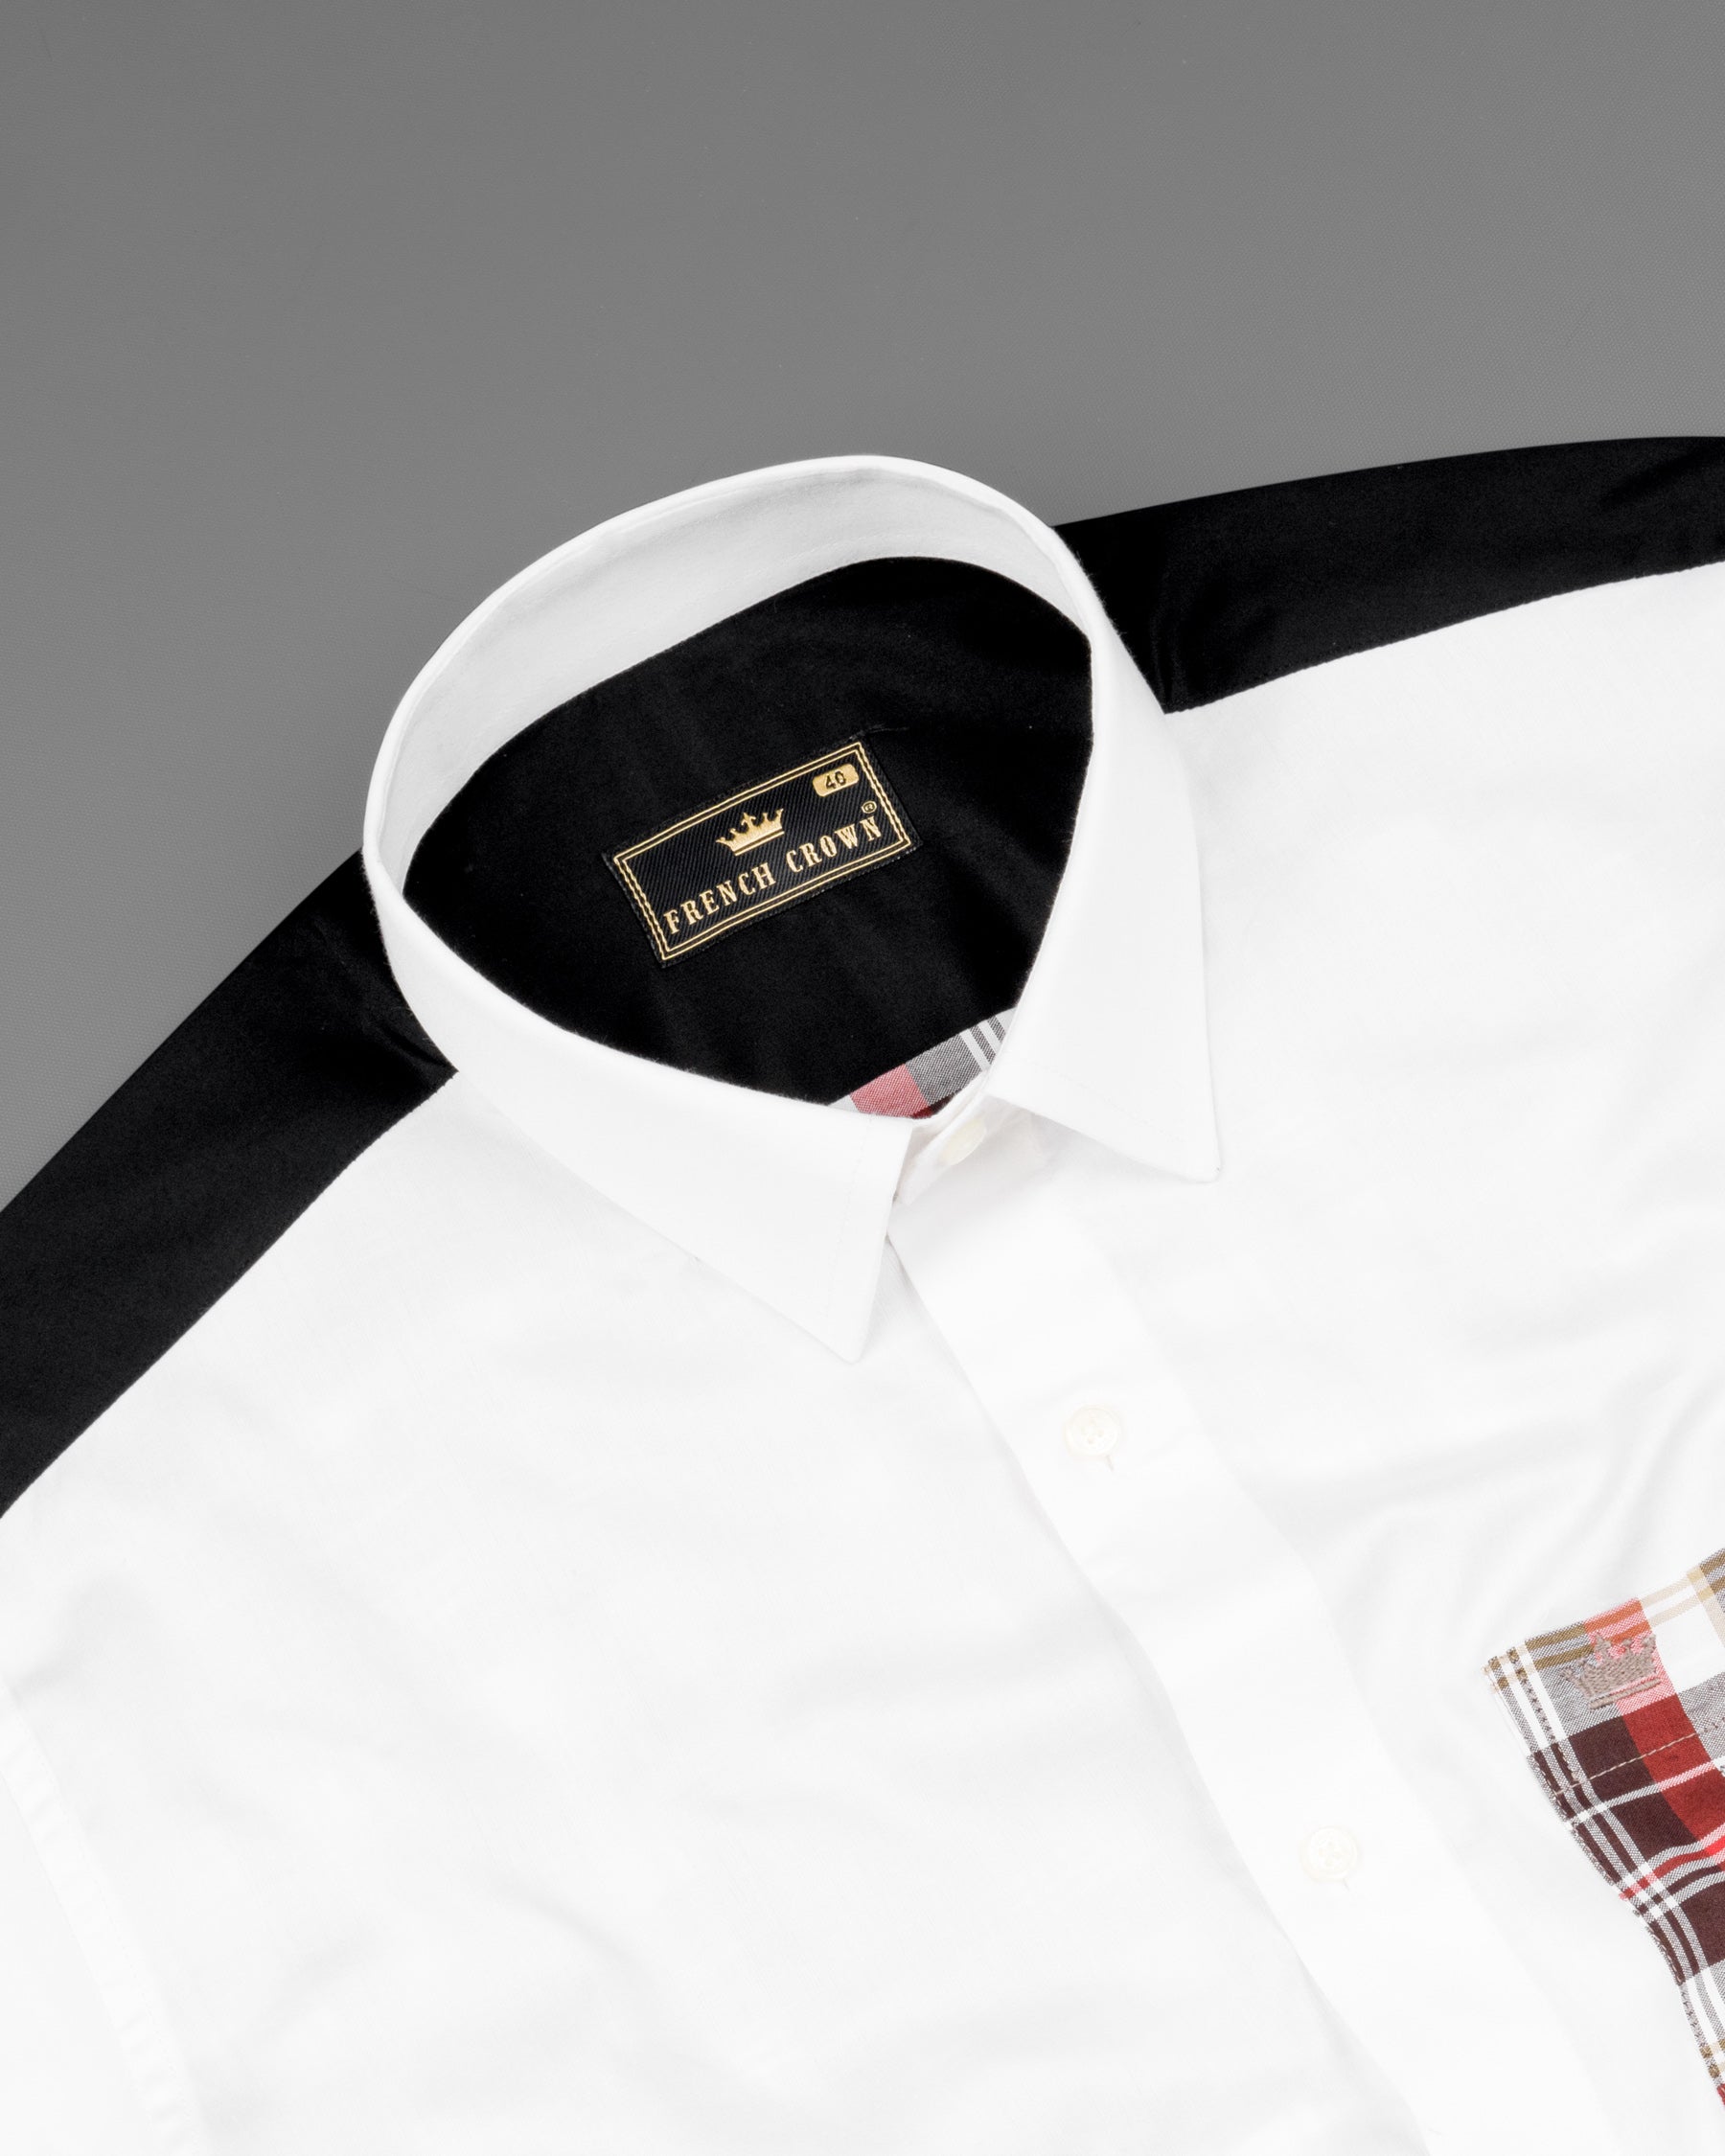 Bright White with Checkered Pocket Super Soft Premium Cotton Shirt 6732-D20-38,6732-D20-38,6732-D20-39,6732-D20-39,6732-D20-40,6732-D20-40,6732-D20-42,6732-D20-42,6732-D20-44,6732-D20-44,6732-D20-46,6732-D20-46,6732-D20-48,6732-D20-48,6732-D20-50,6732-D20-50,6732-D20-52,6732-D20-52 